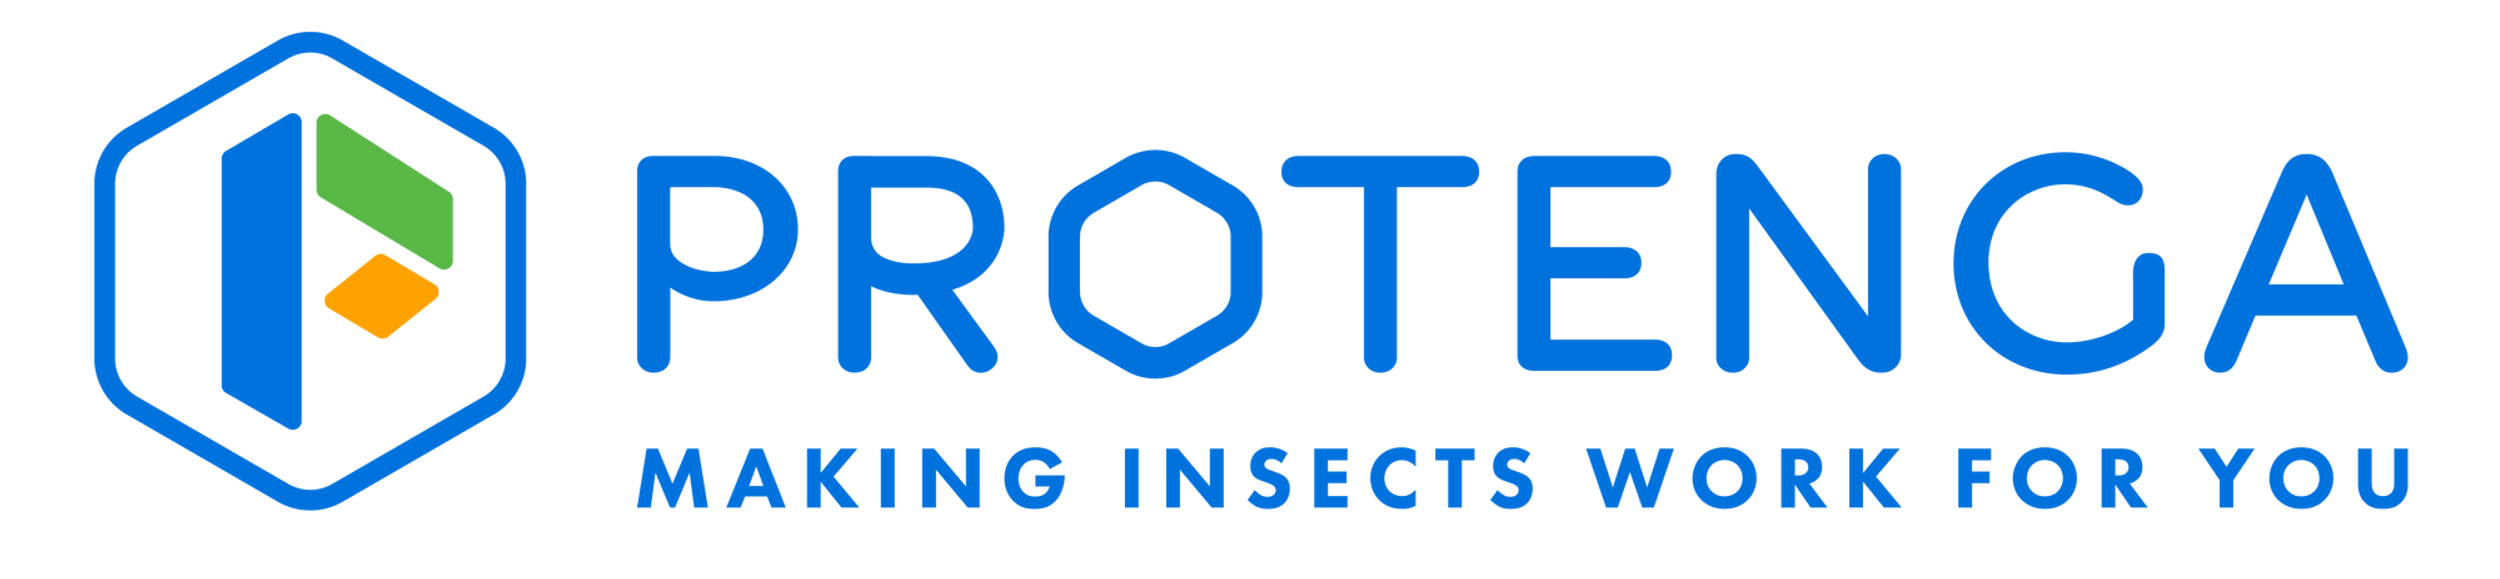  Global Insect Protein Market Major Players